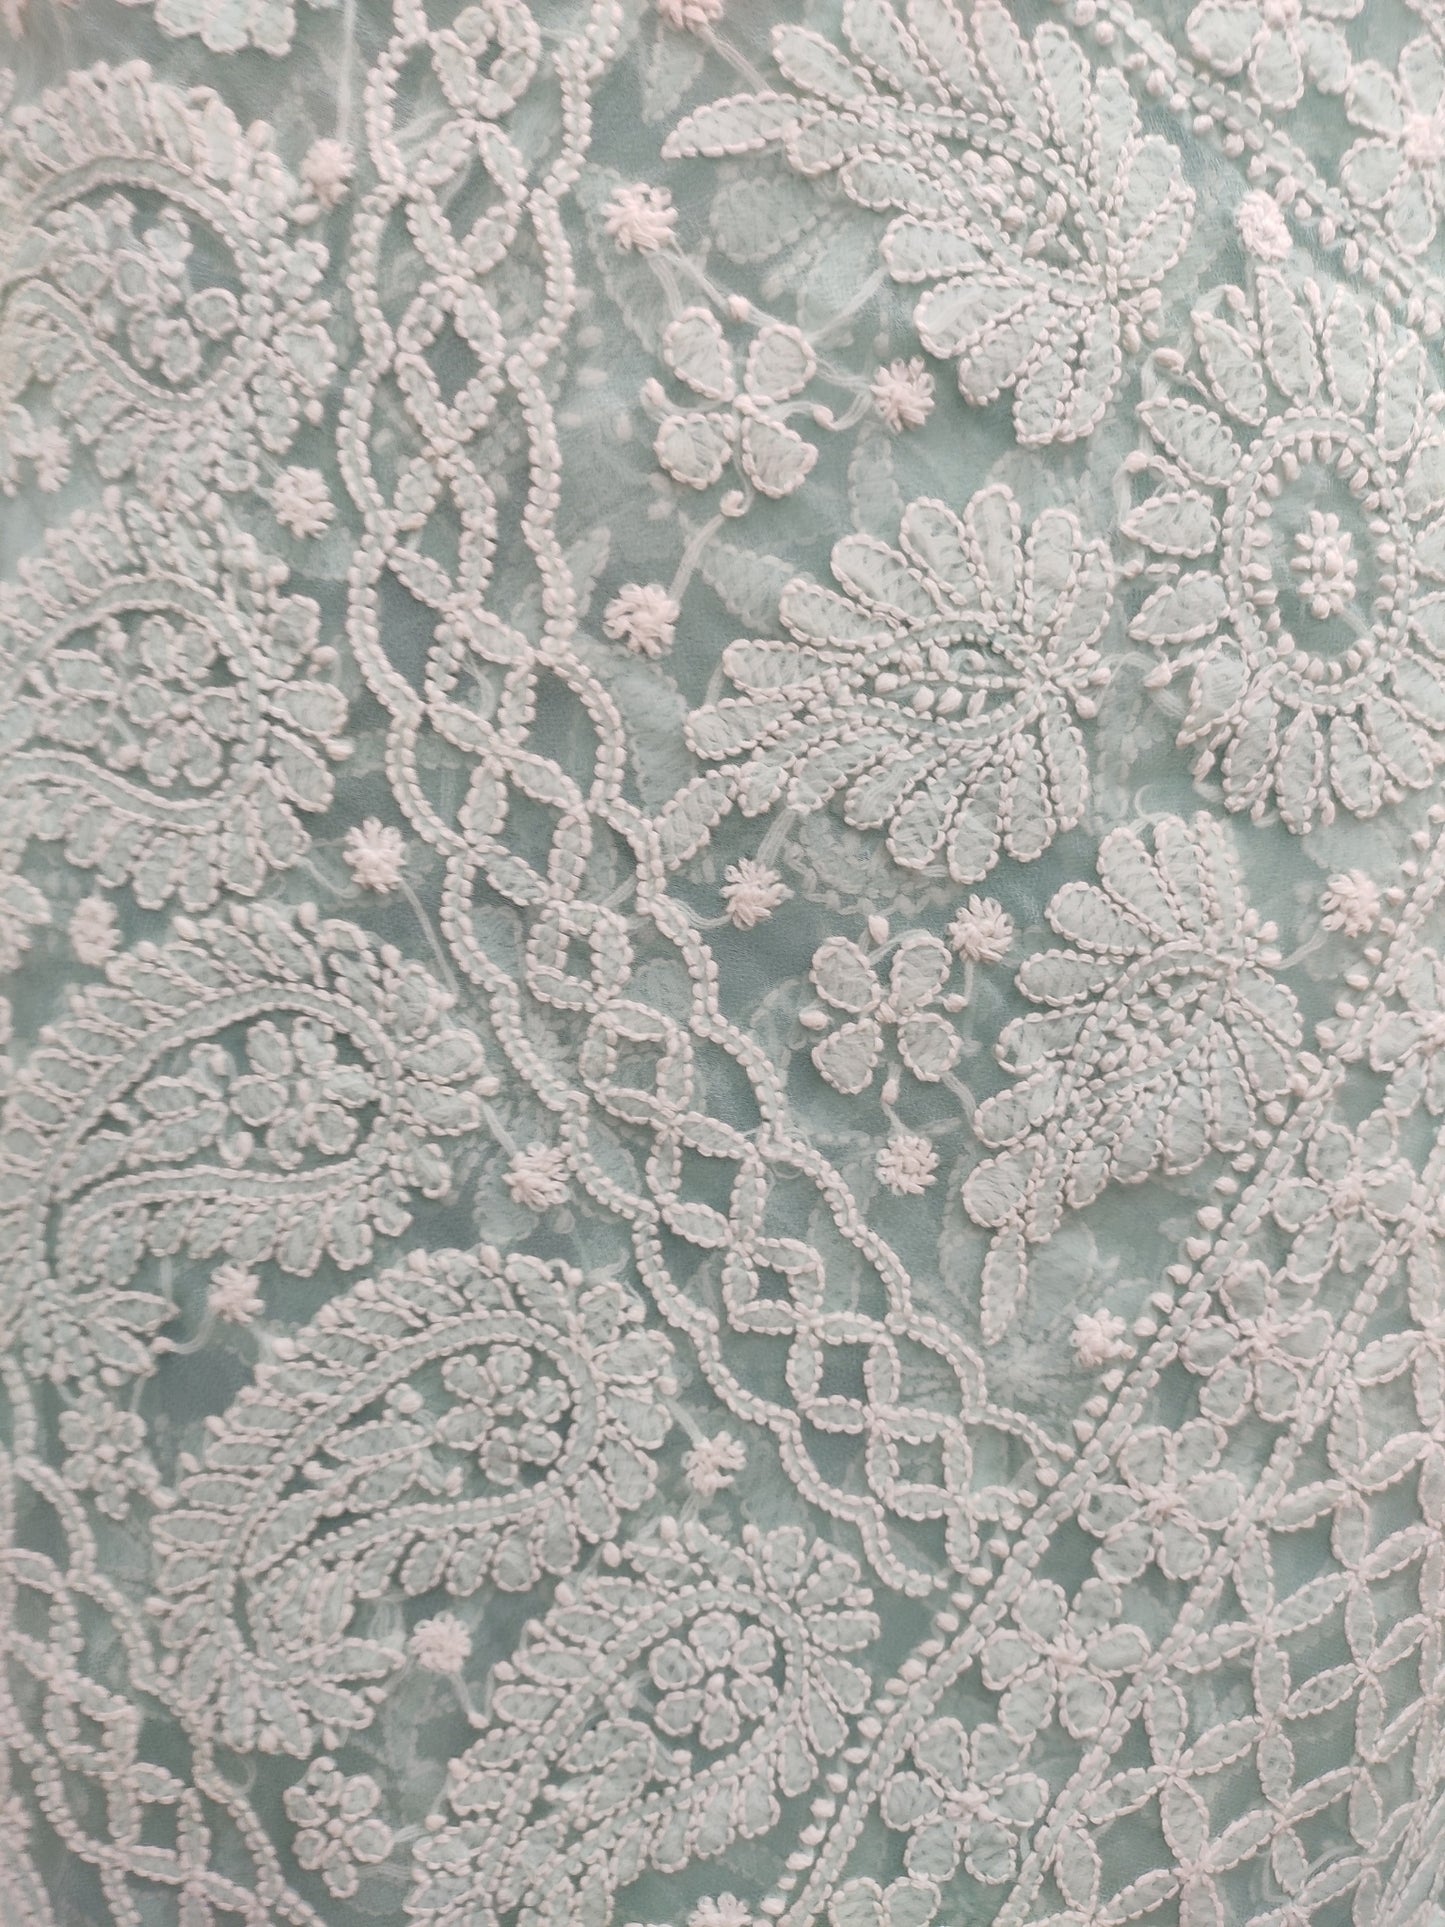 Shyamal Chikan Hand Embroidered Sea Green Georgette Lucknowi Chikankari Full Jaal Saree With Blouse Piece - S21558